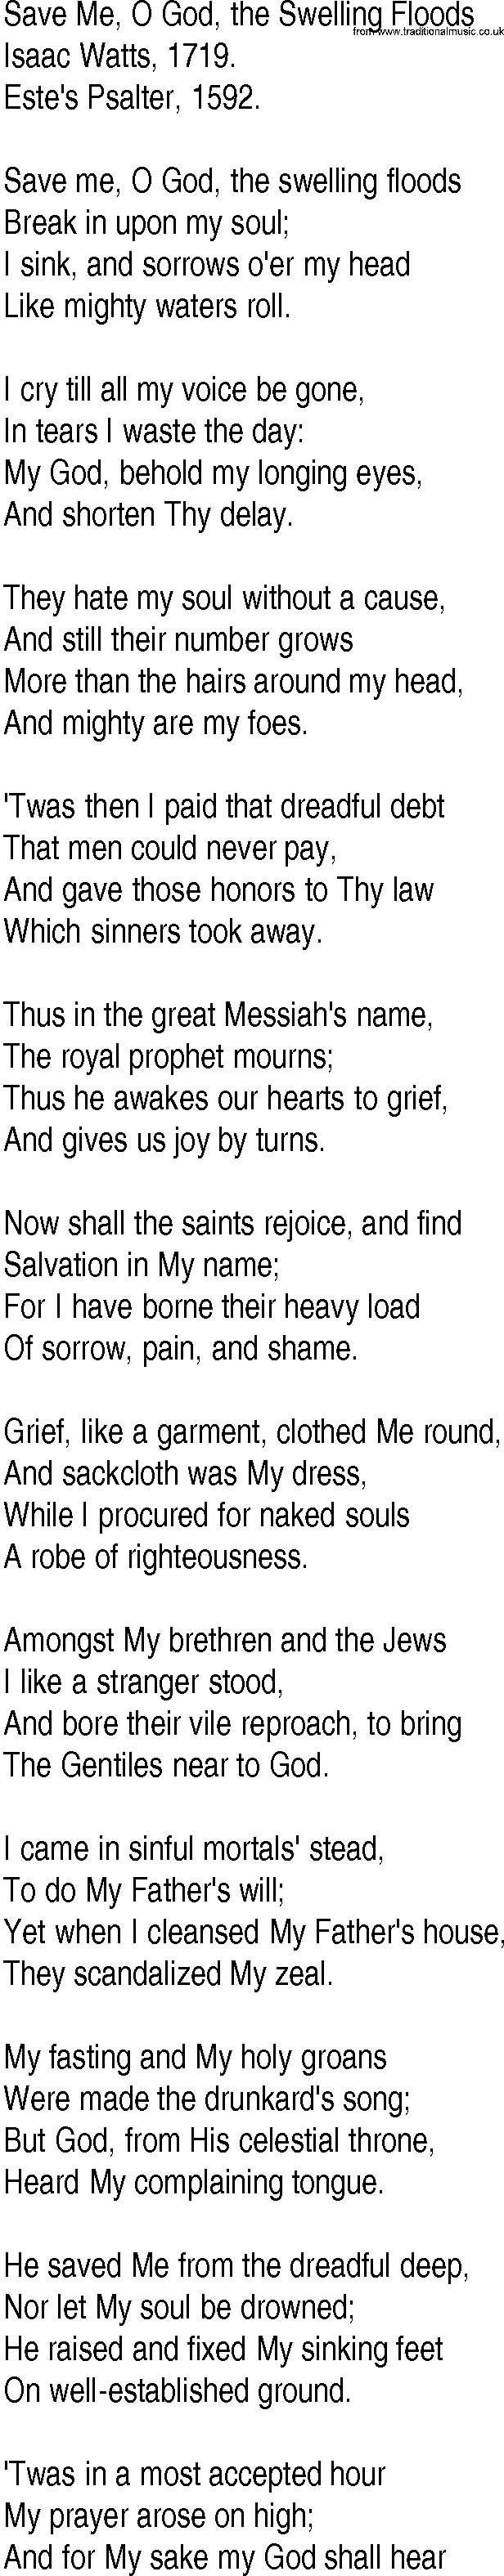 Hymn and Gospel Song: Save Me, O God, the Swelling Floods by Isaac Watts lyrics